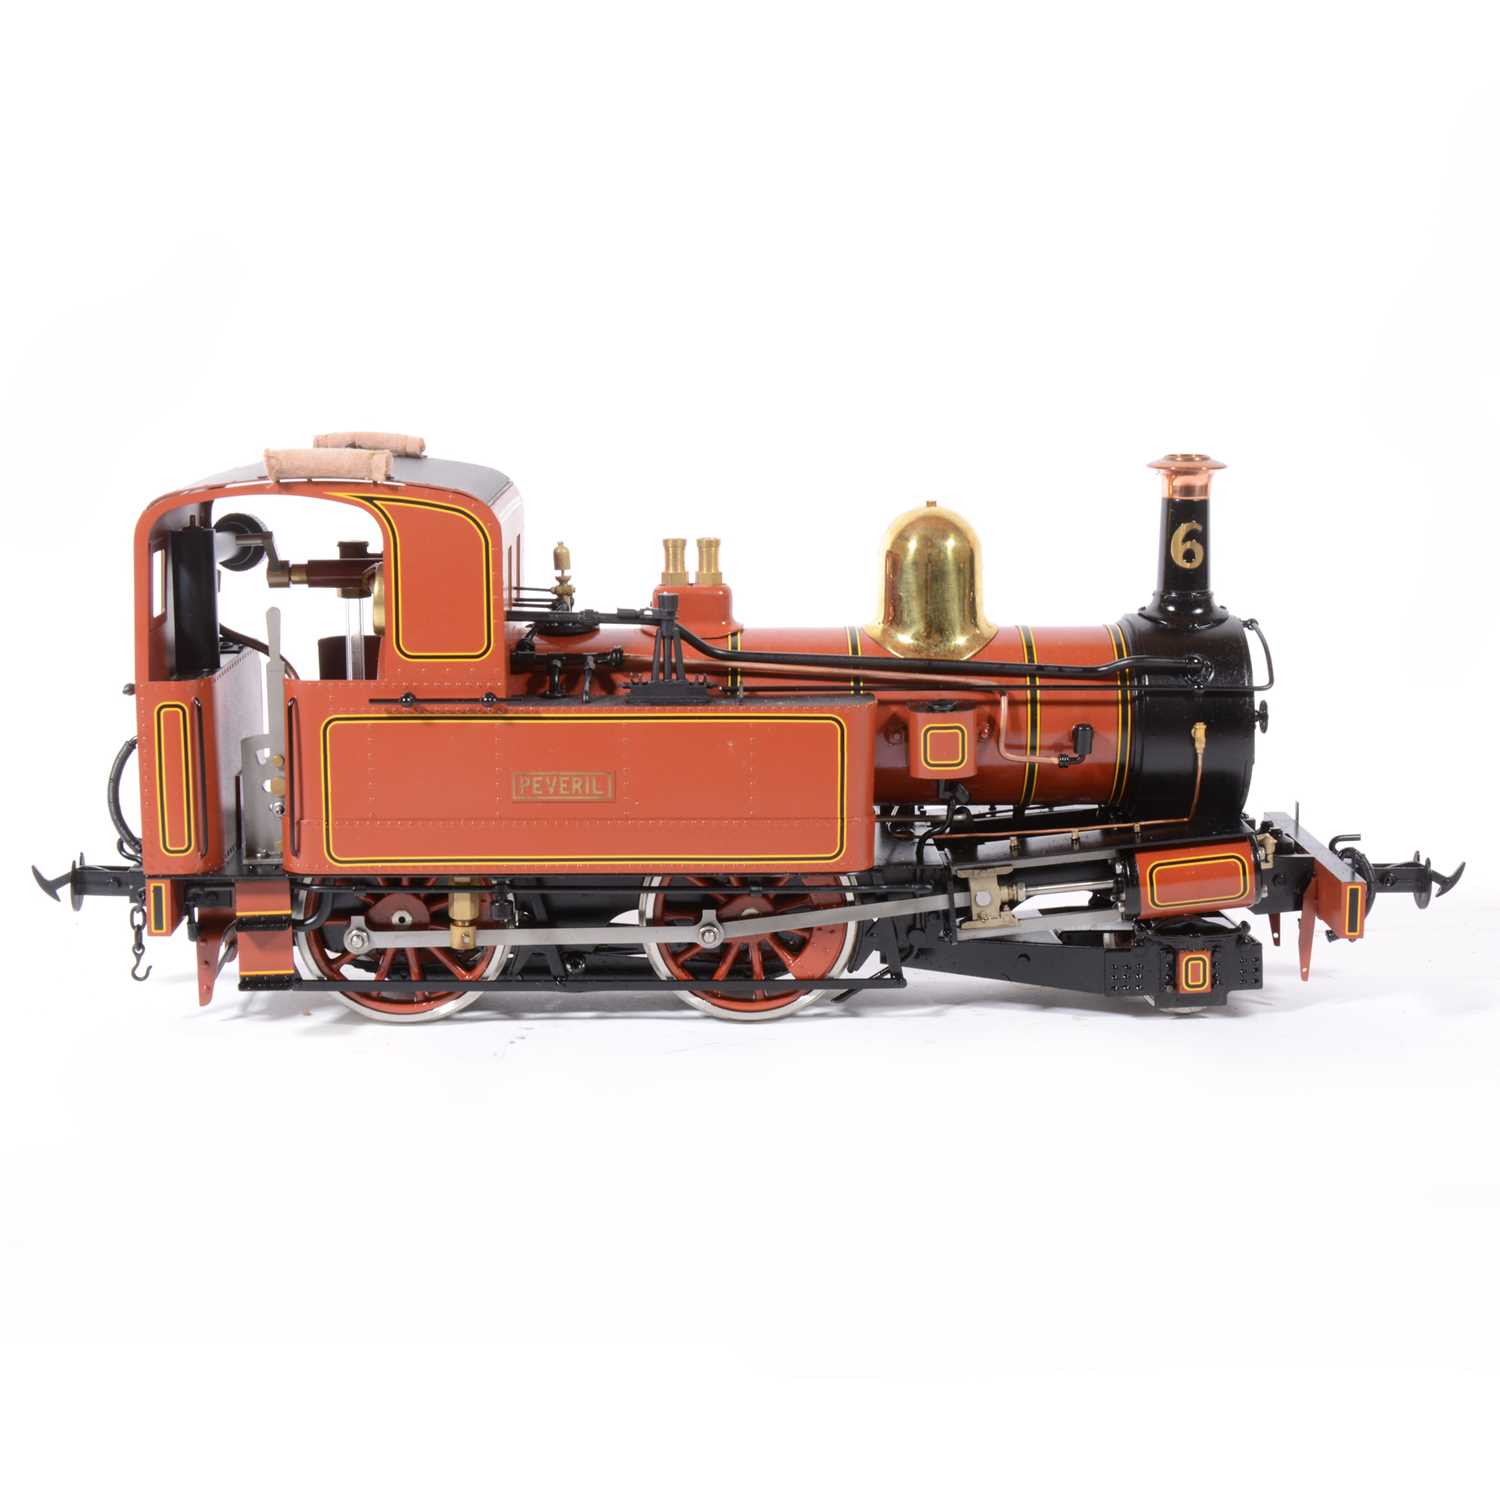 40 - Accucraft live steam, gauge 1 / G scale, 45mm locomotive, Isle of Man 'Peveril', 2-4-0T, with instructions and box.